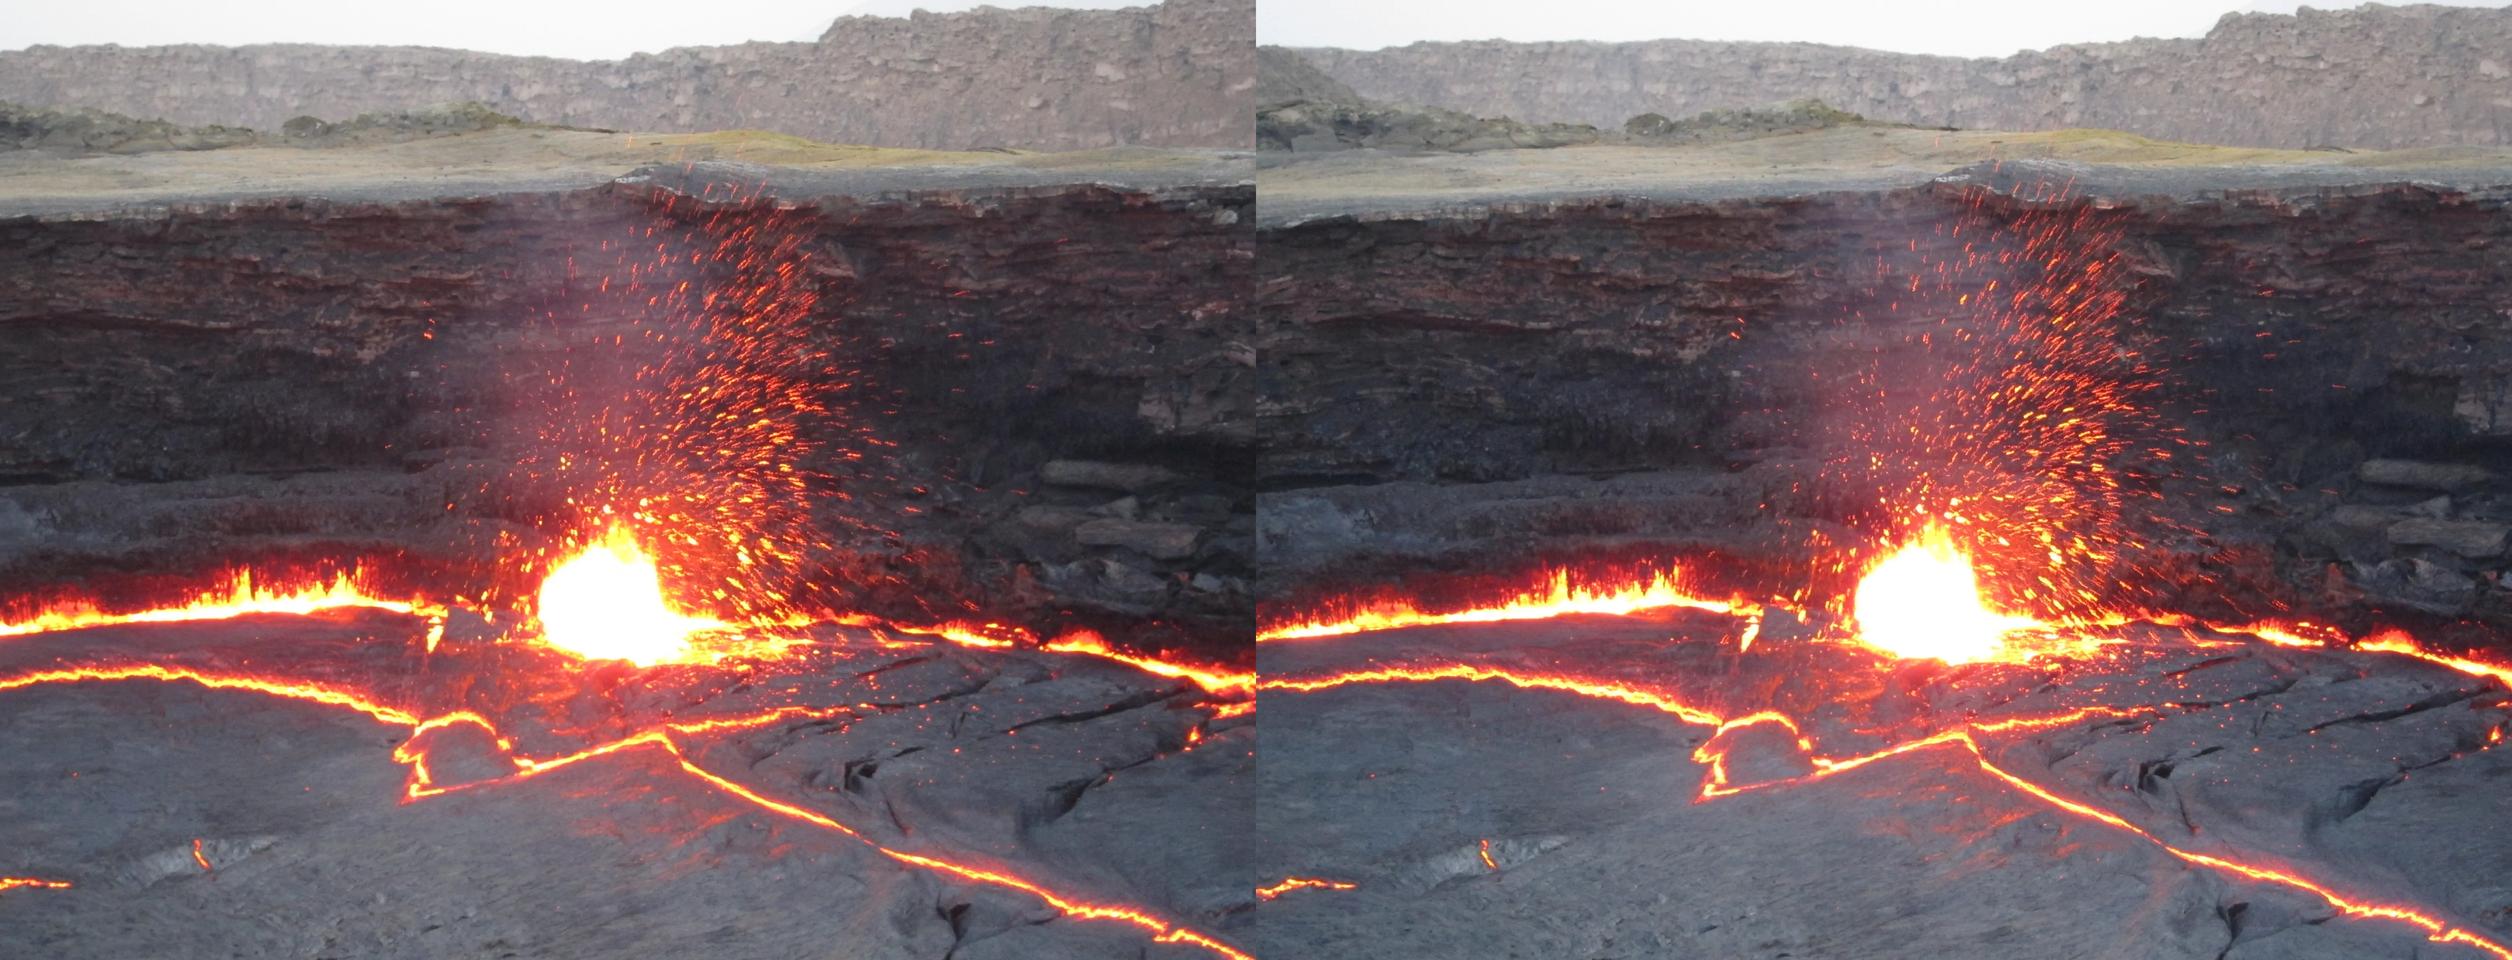 Hyperstereo on an active volcano 4